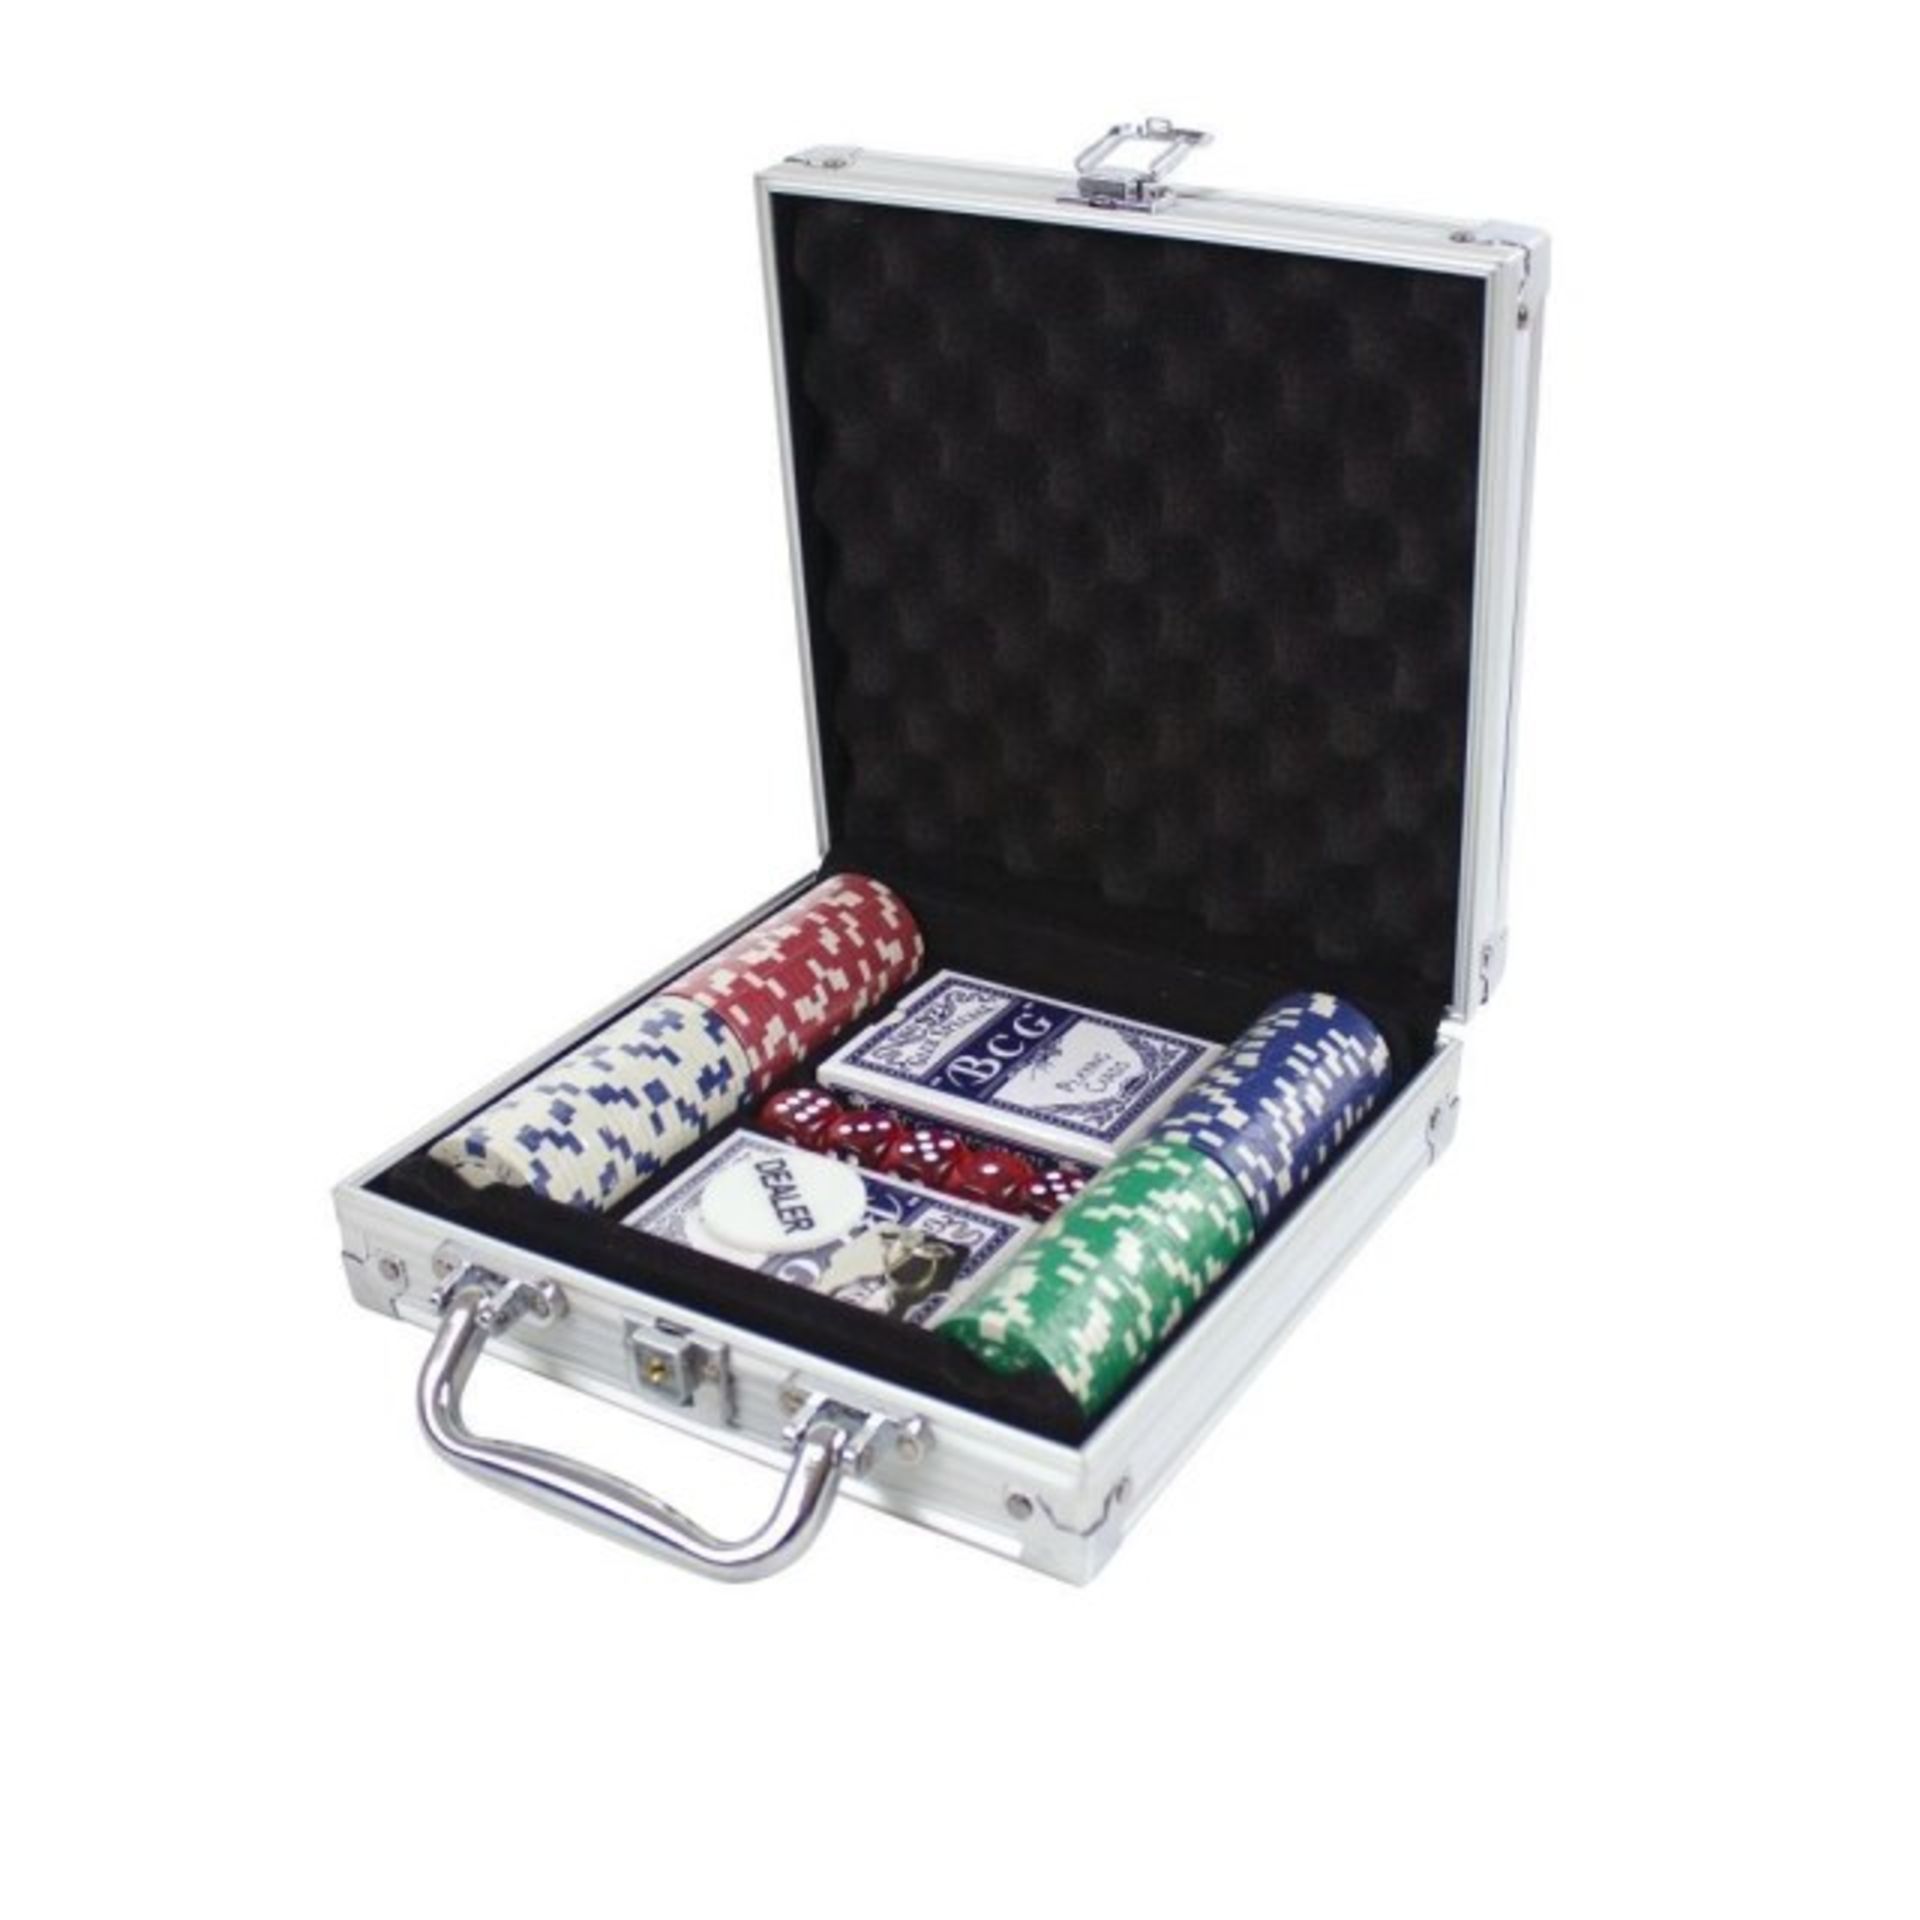 V *TRADE QTY* Brand New 100 Piece Casino Style Poker Set In Carry Case X 50 YOUR BID PRICE TO BE